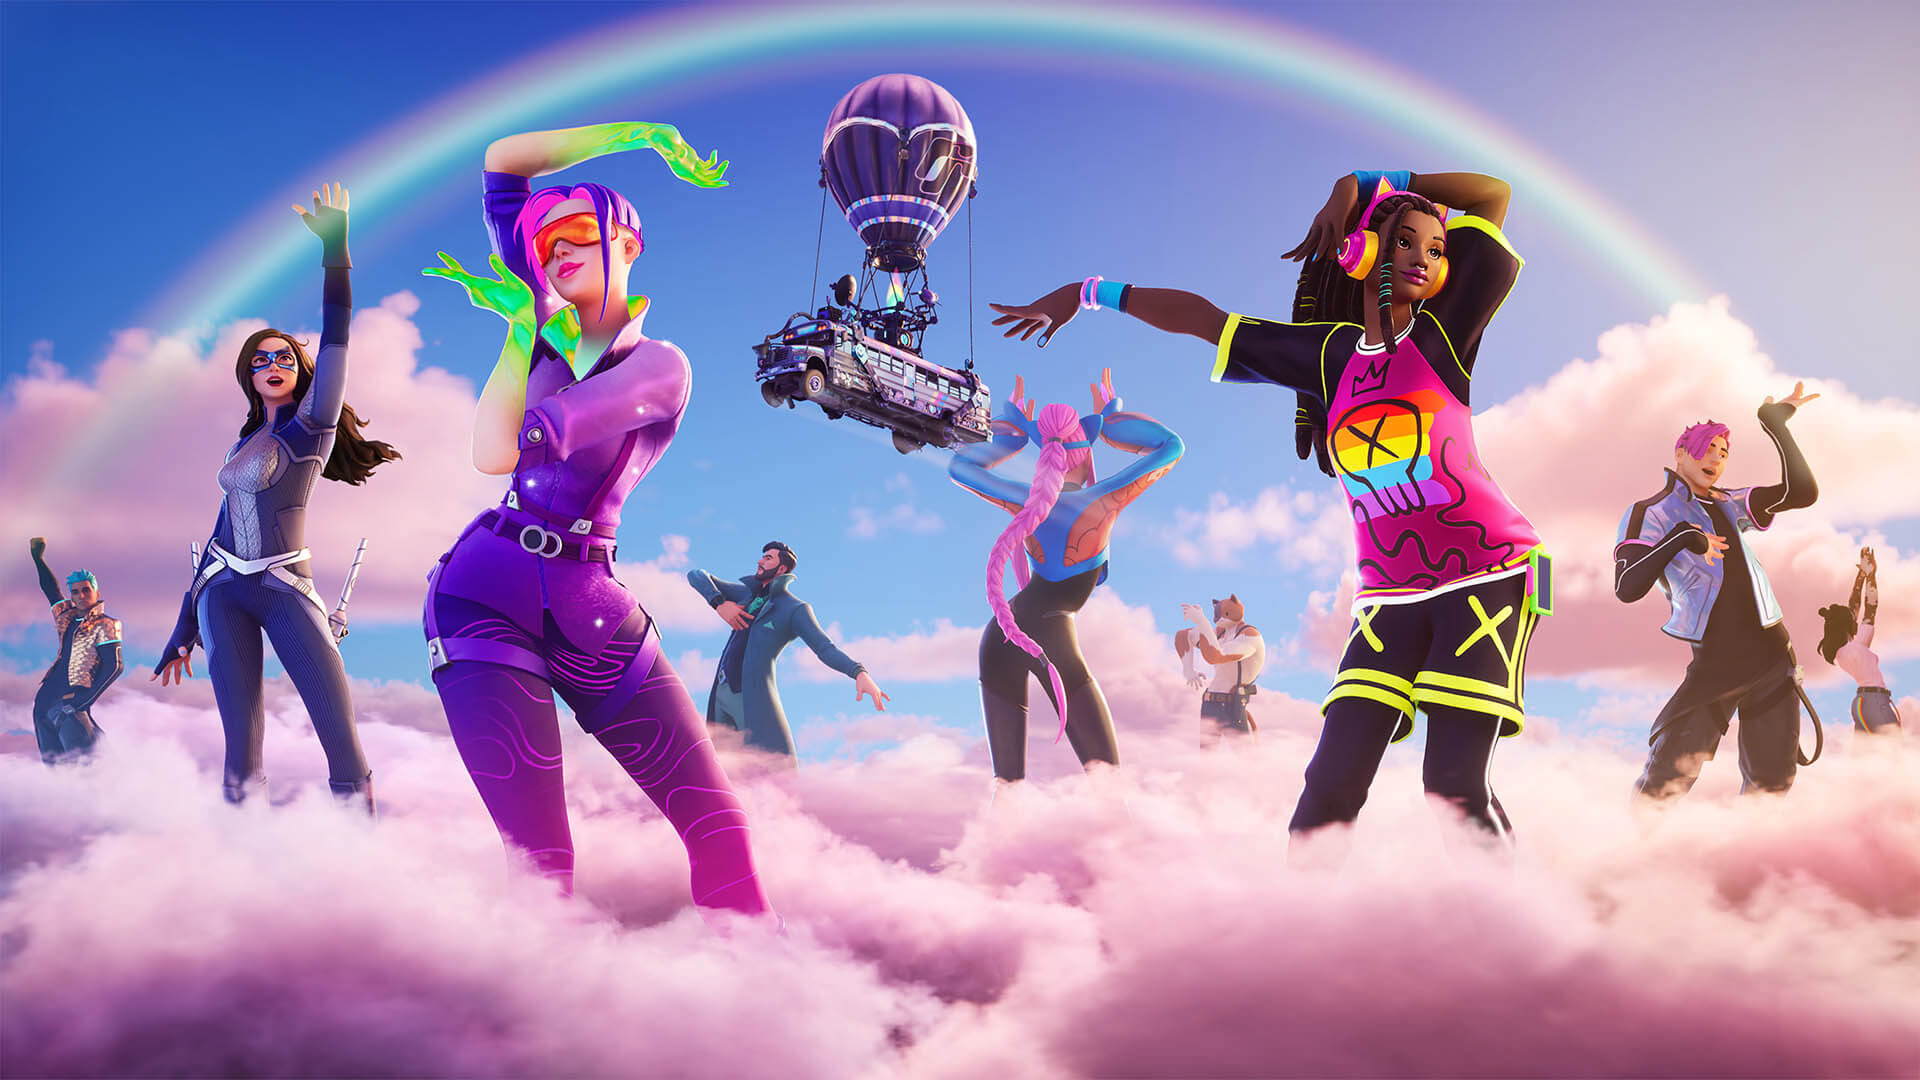 Fortnite V24.10 Update Release Date, Skins, Map Changes and More